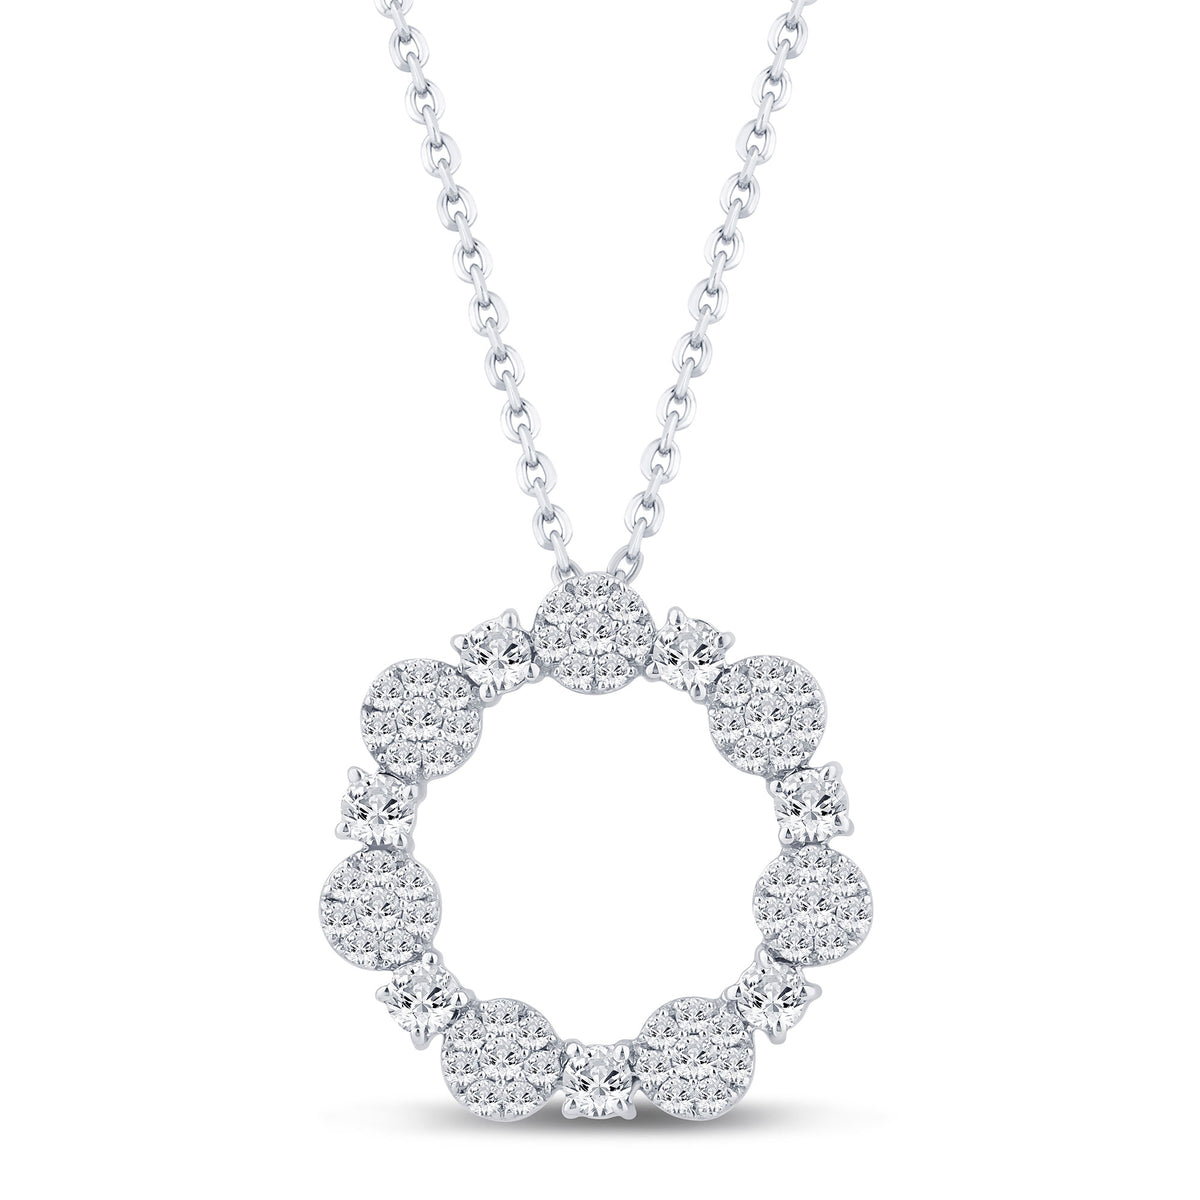 10K WHITE GOLD 1.25 CARAT REAL DIAMOND PENDANT NECKLACE WITH GOLD CHAIN